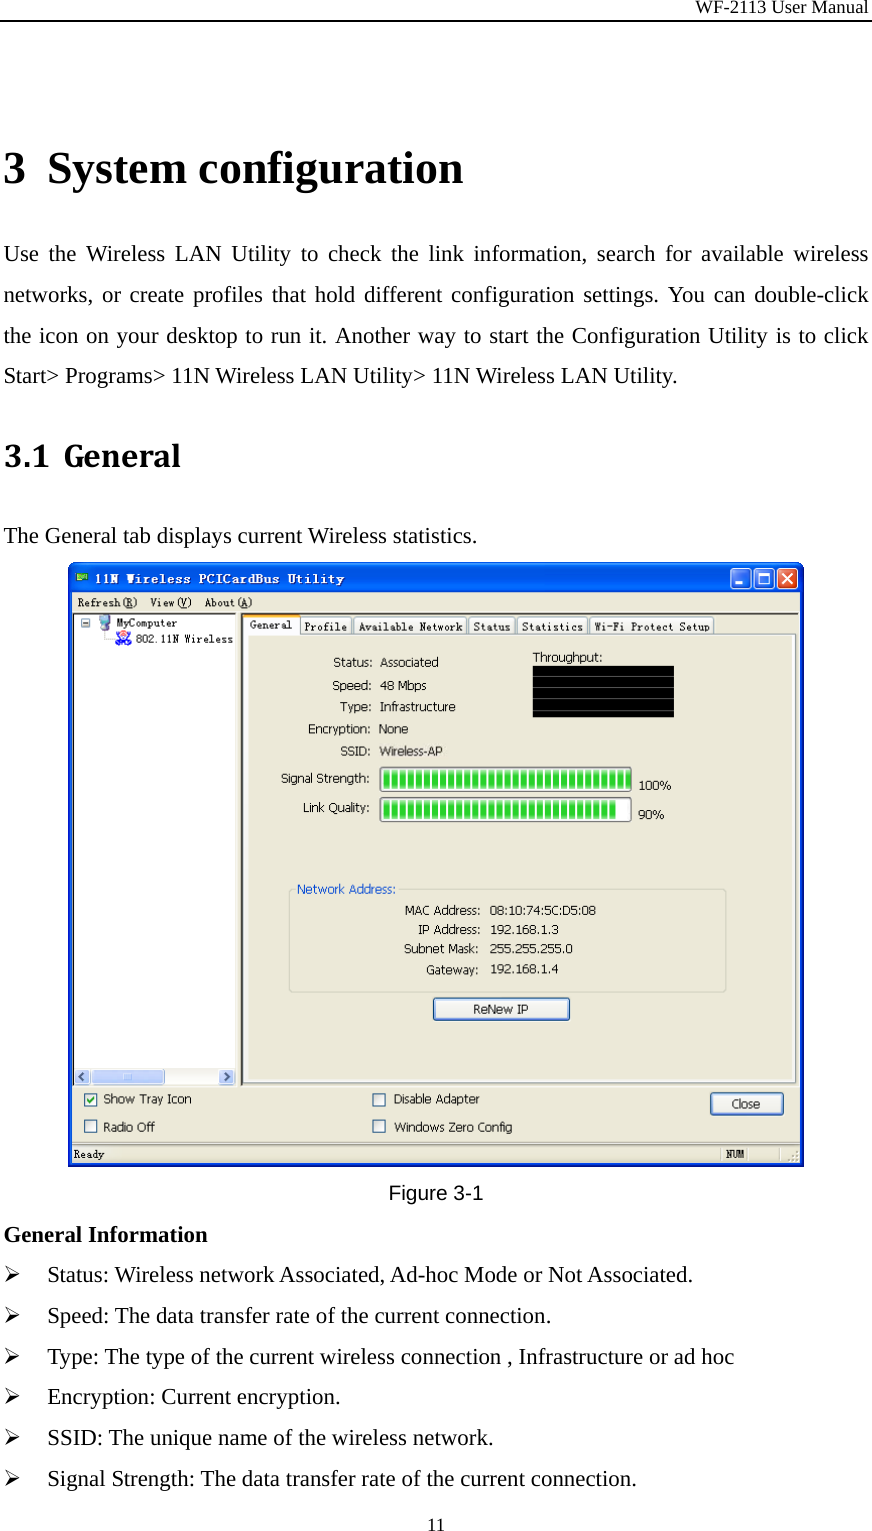 WF-2113 User Manual 11 3 System configuration Use the Wireless LAN Utility to check the link information, search for available wireless networks, or create profiles that hold different configuration settings. You can double-click the icon on your desktop to run it. Another way to start the Configuration Utility is to click Start&gt; Programs&gt; 11N Wireless LAN Utility&gt; 11N Wireless LAN Utility. 3.1 GeneralThe General tab displays current Wireless statistics. Figure 3-1 General Information ¾ Status: Wireless network Associated, Ad-hoc Mode or Not Associated. ¾ Speed: The data transfer rate of the current connection. ¾ Type: The type of the current wireless connection , Infrastructure or ad hoc ¾ Encryption: Current encryption. ¾ SSID: The unique name of the wireless network. ¾ Signal Strength: The data transfer rate of the current connection. 